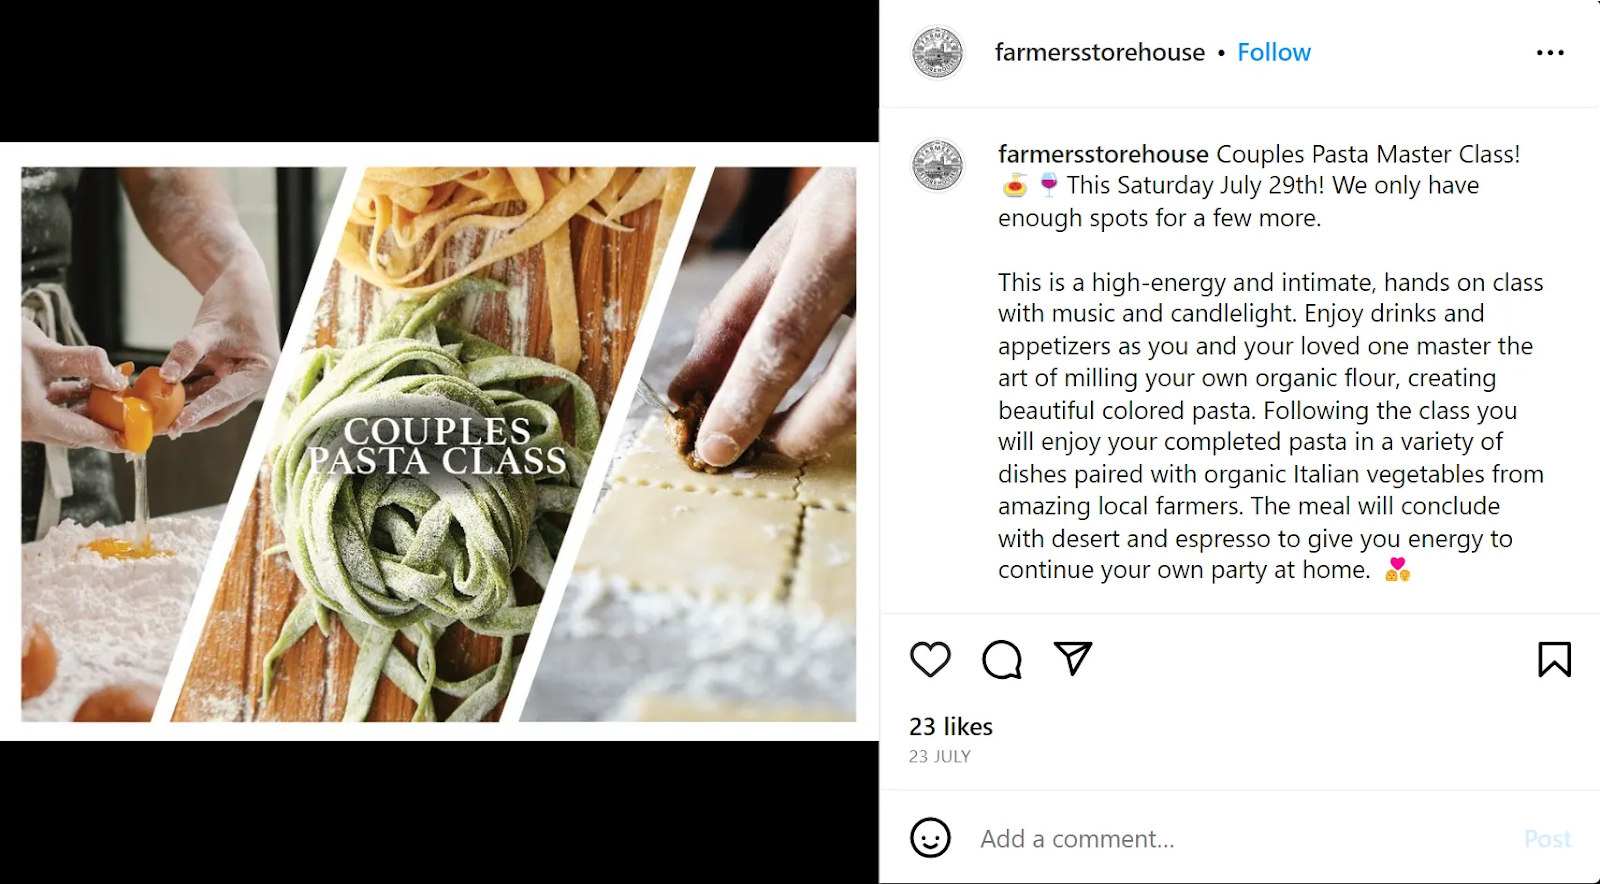 Farmer’s Storehouse announcing their event "Couples Pasta Master Class" on their Instagram page